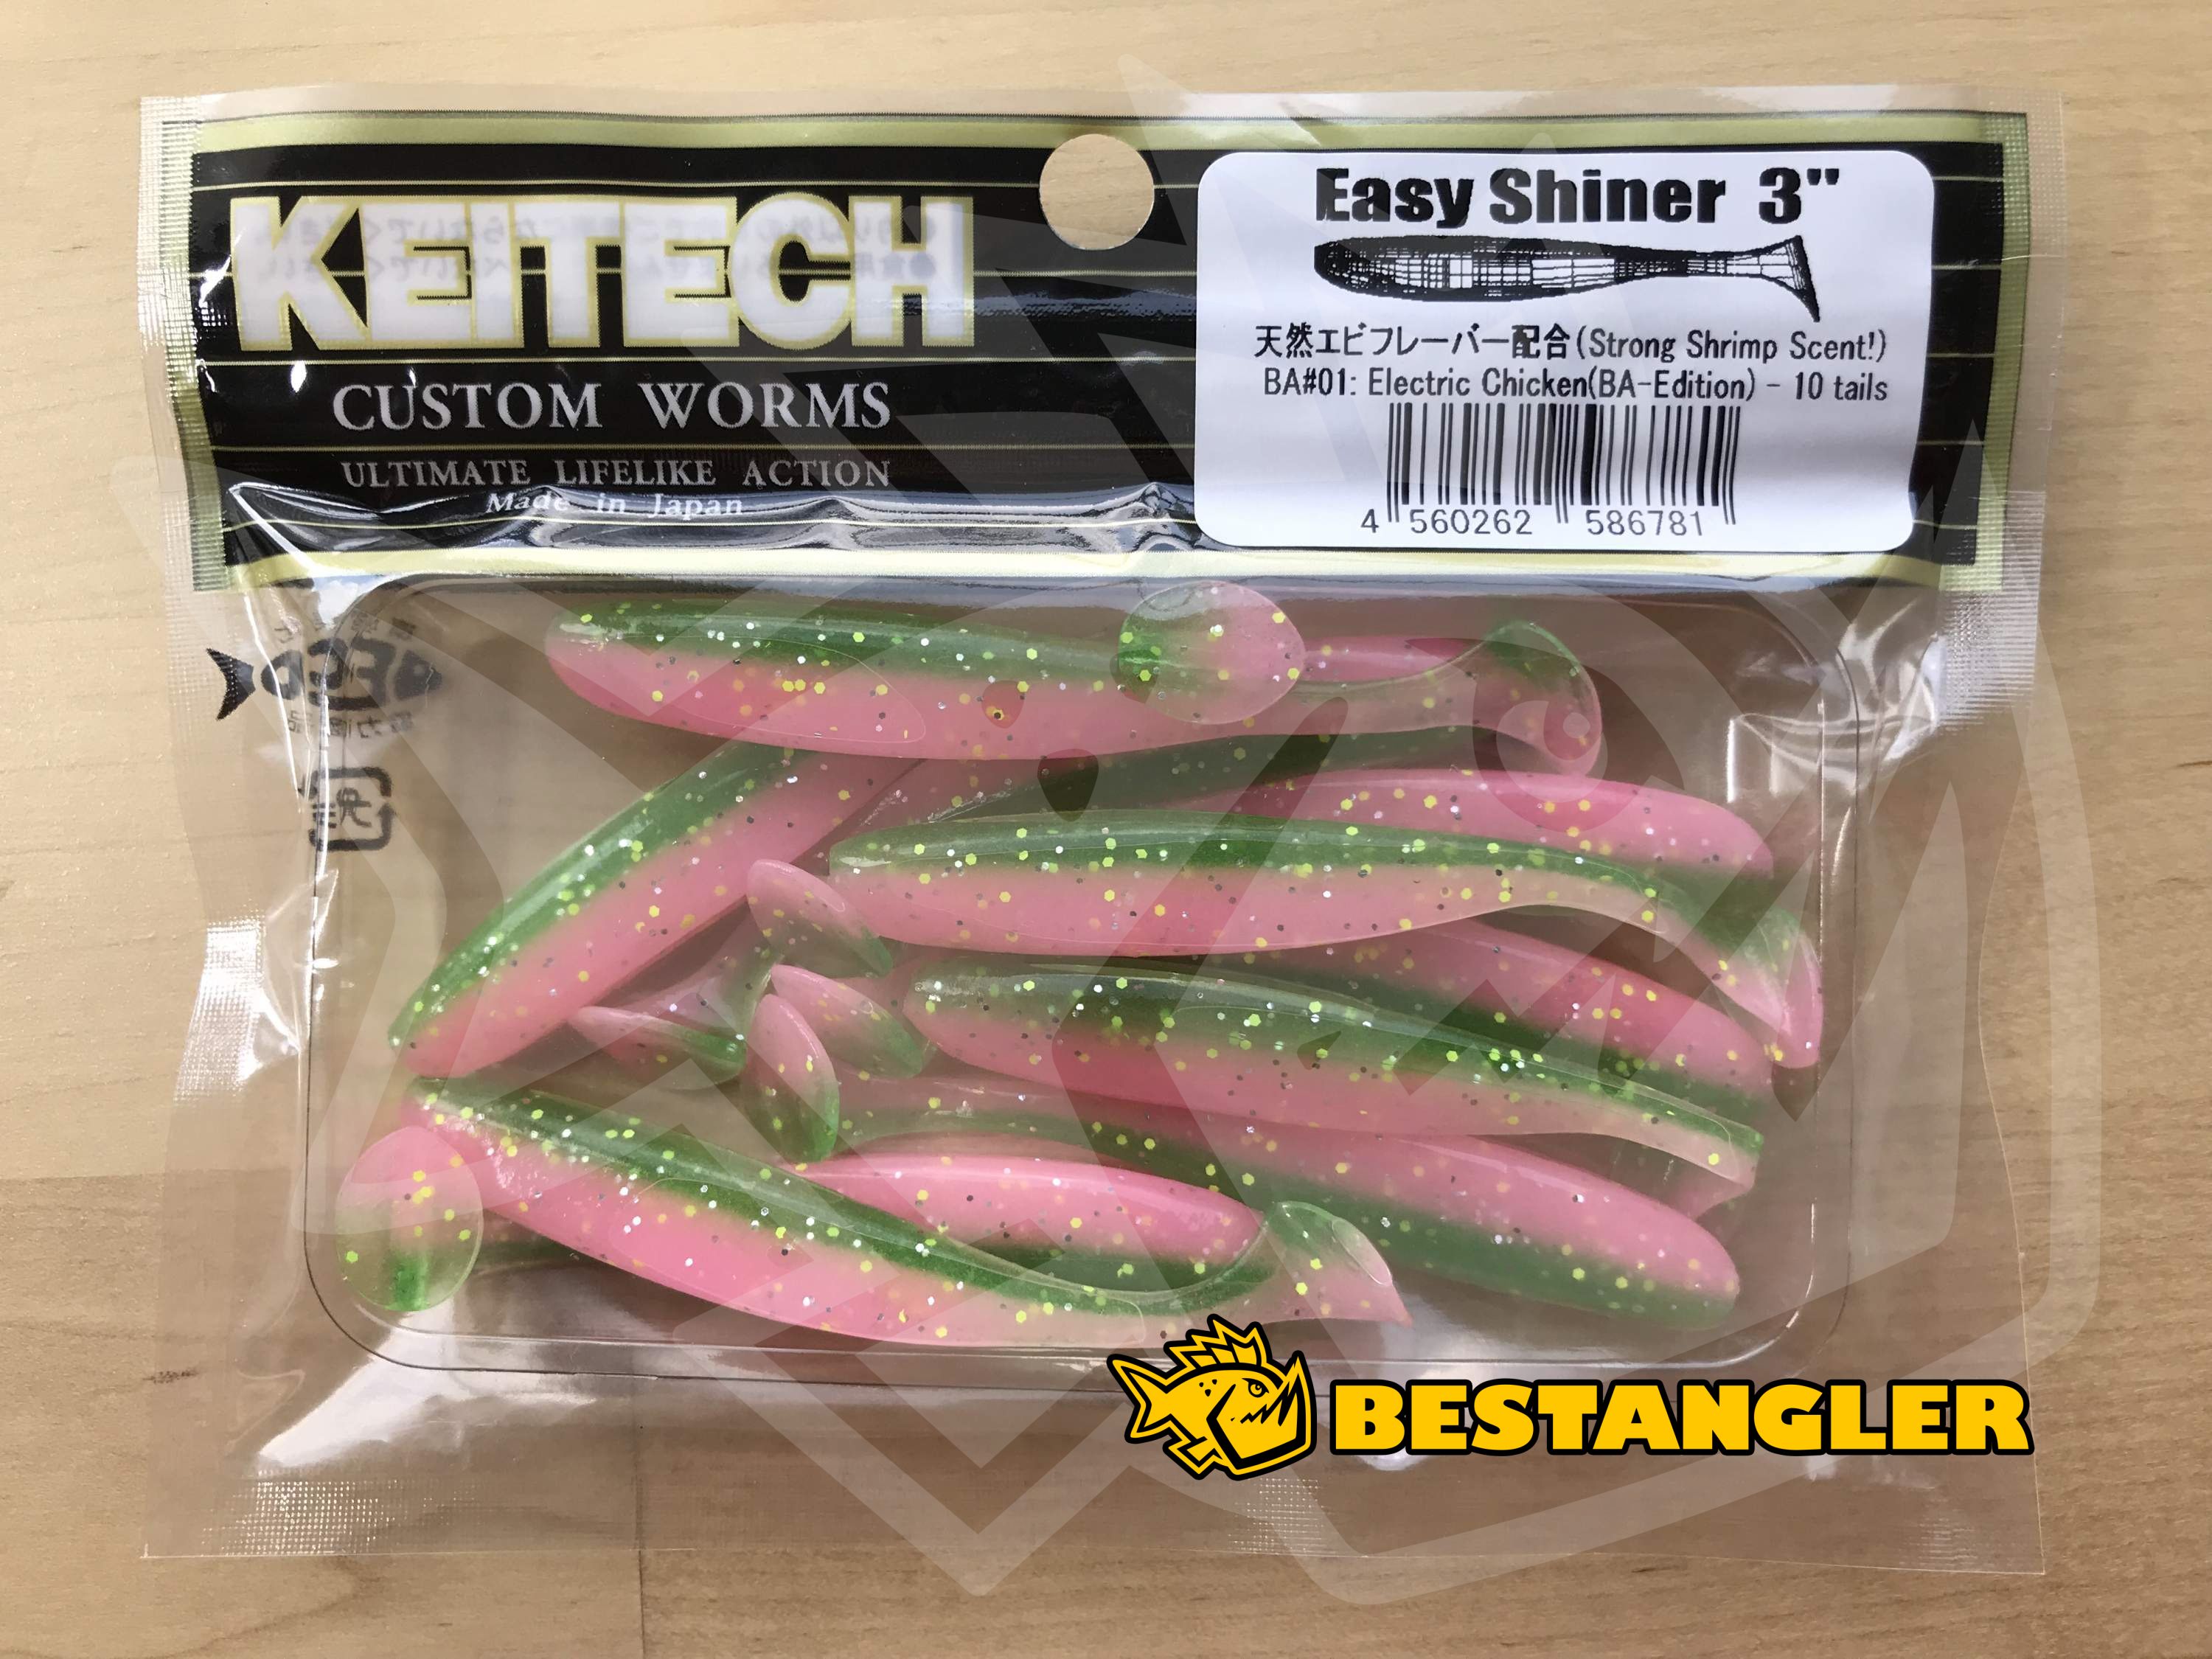 Keitech Easy Shiner 3 Electric Chicken